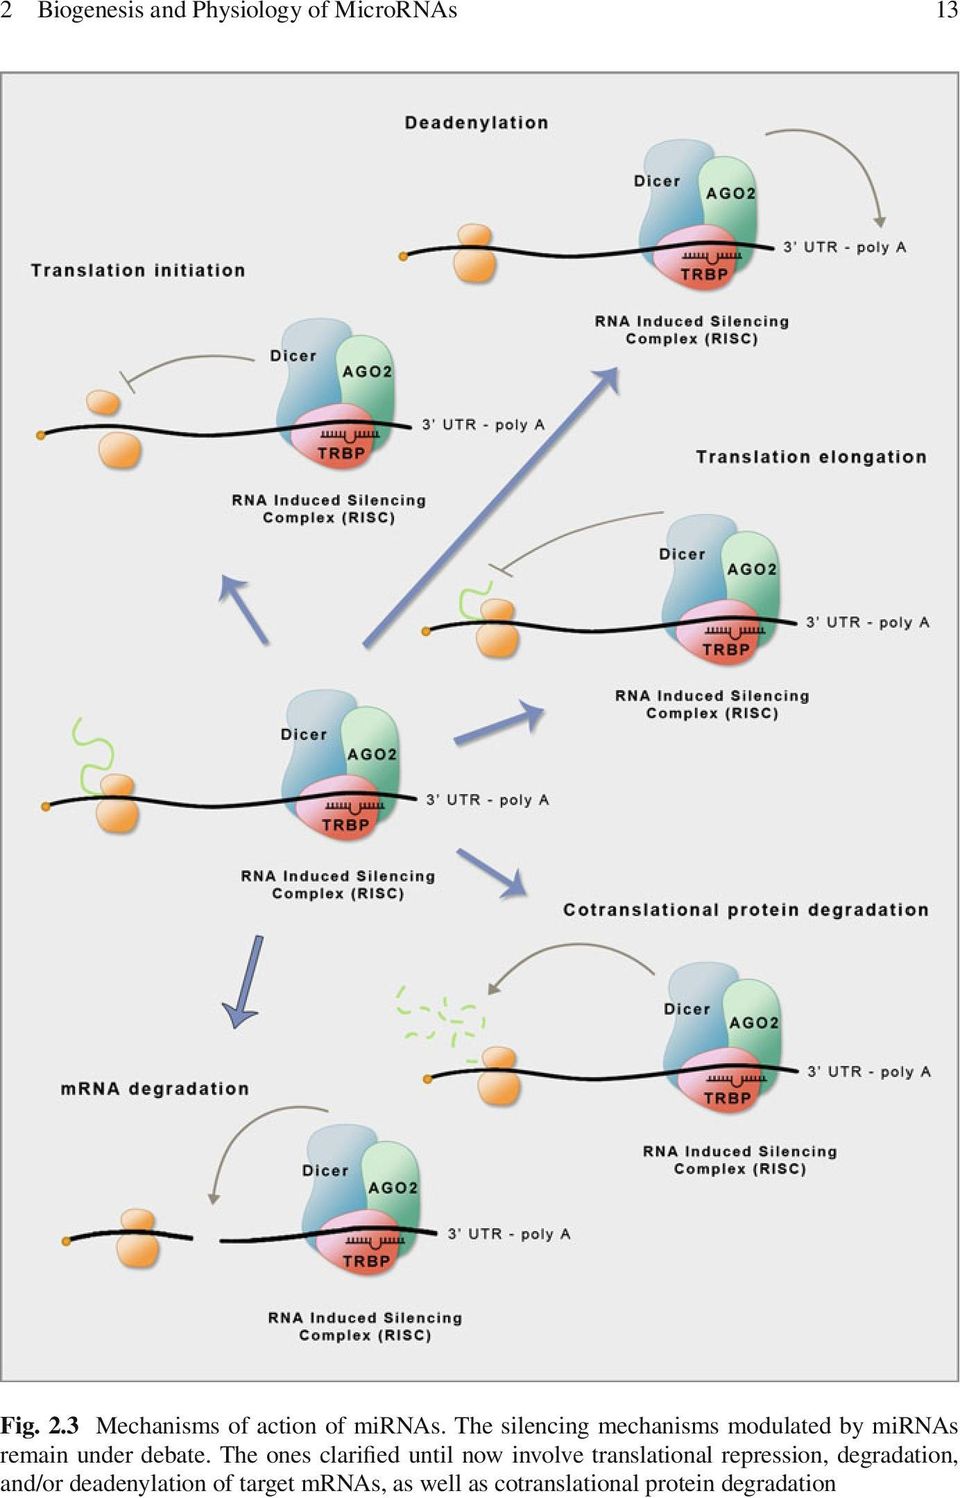 The silencing mechanisms modulated by mirnas remain under debate.